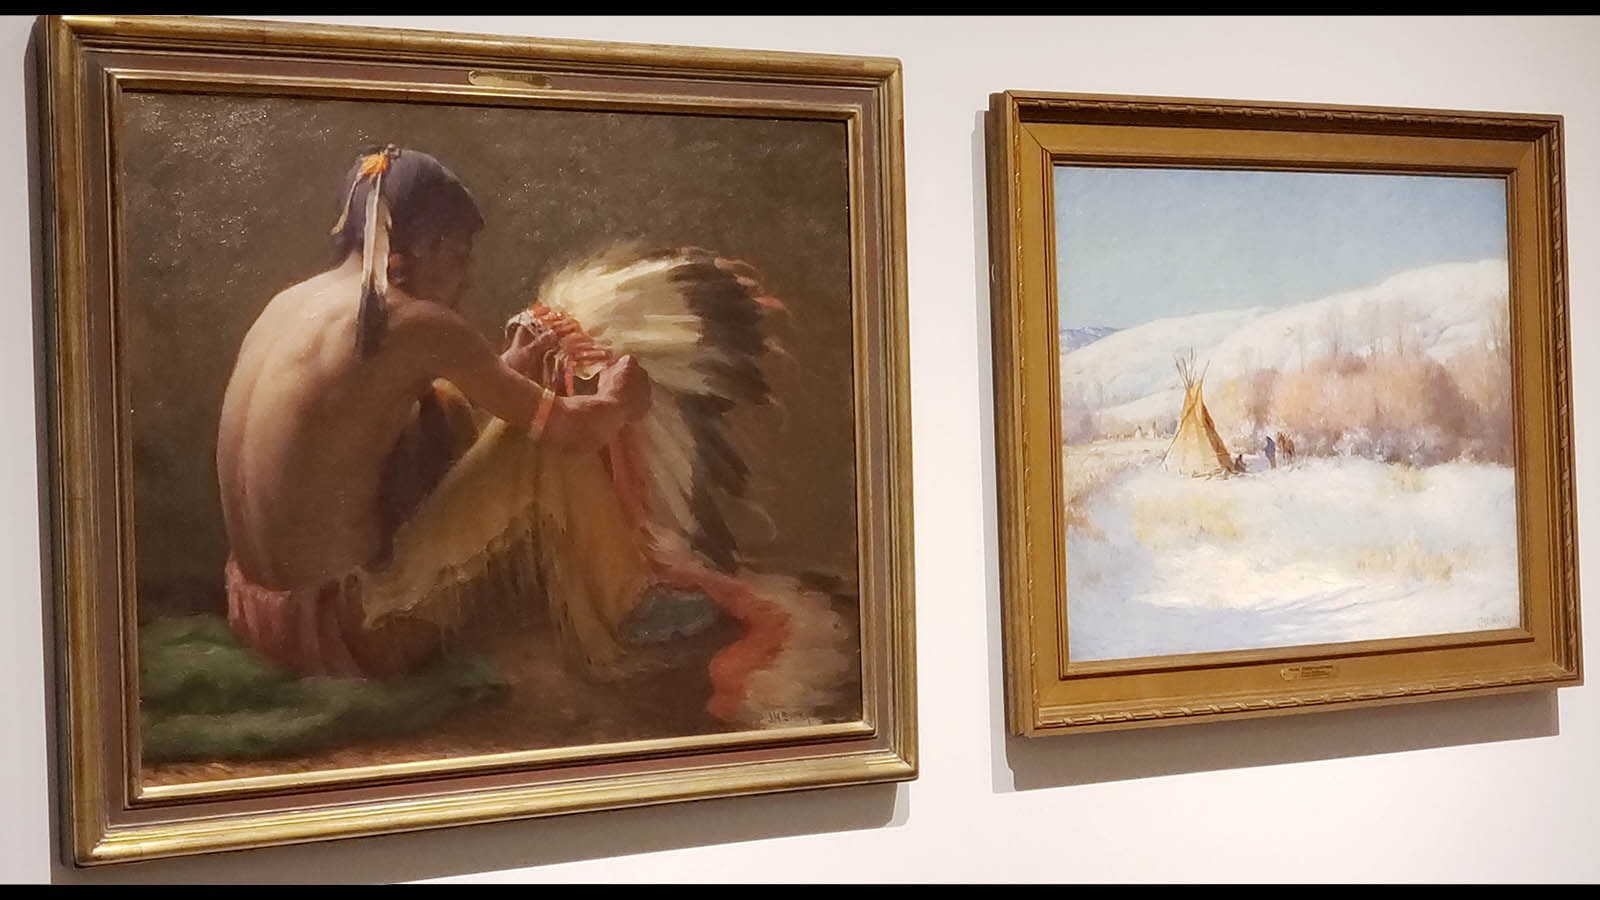 "Remembering Past Deeds" and "Winter Camp Bighorn Mountains" by Joseph Henry Sharp.